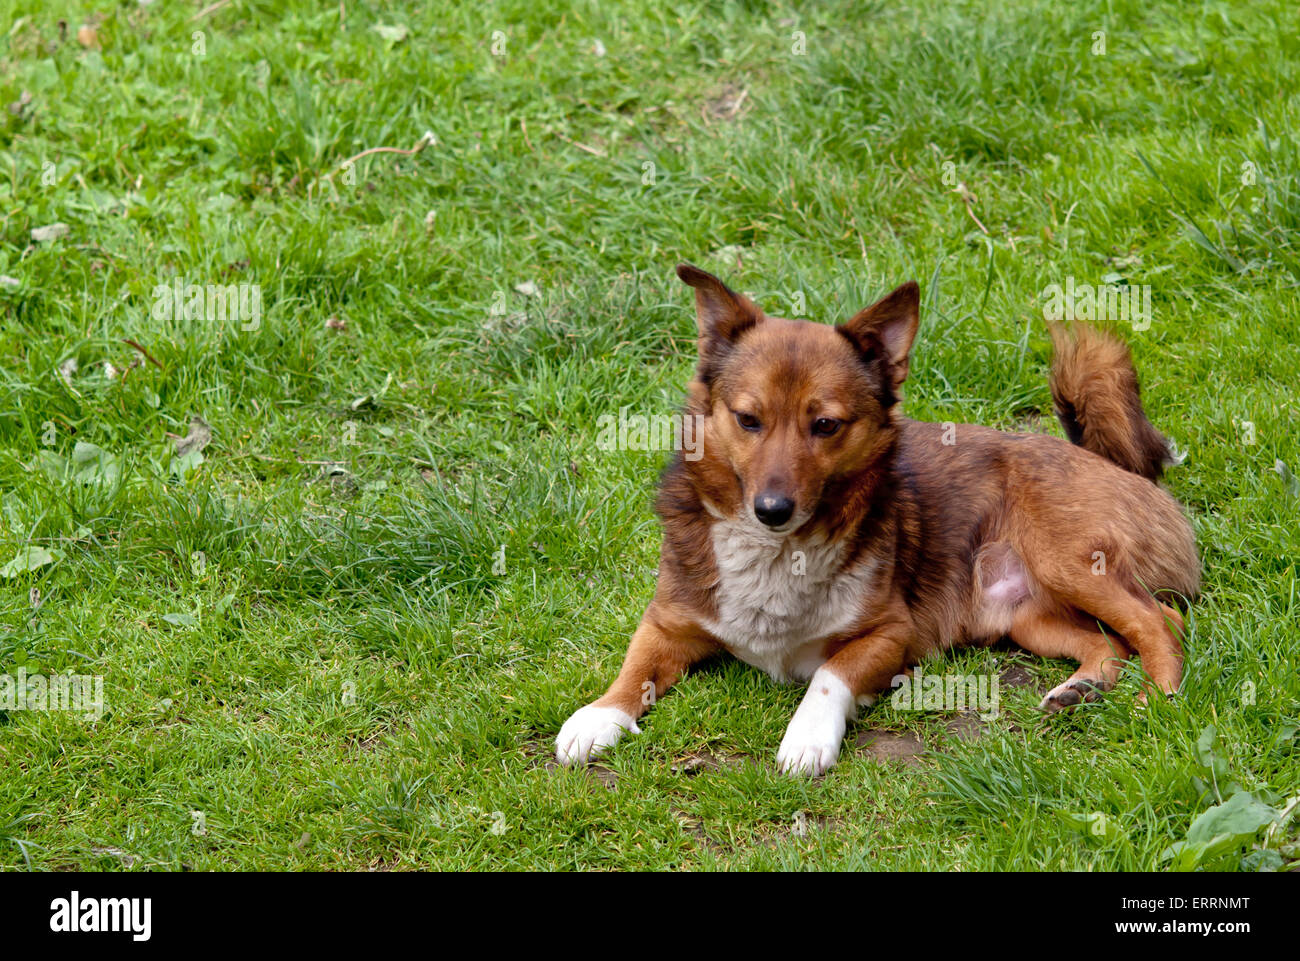 animals, pets, mammal, domestic, dog, isolated, green, white, lawn, sitting, grass, obedience, one, cute, small, affectionate, y Stock Photo